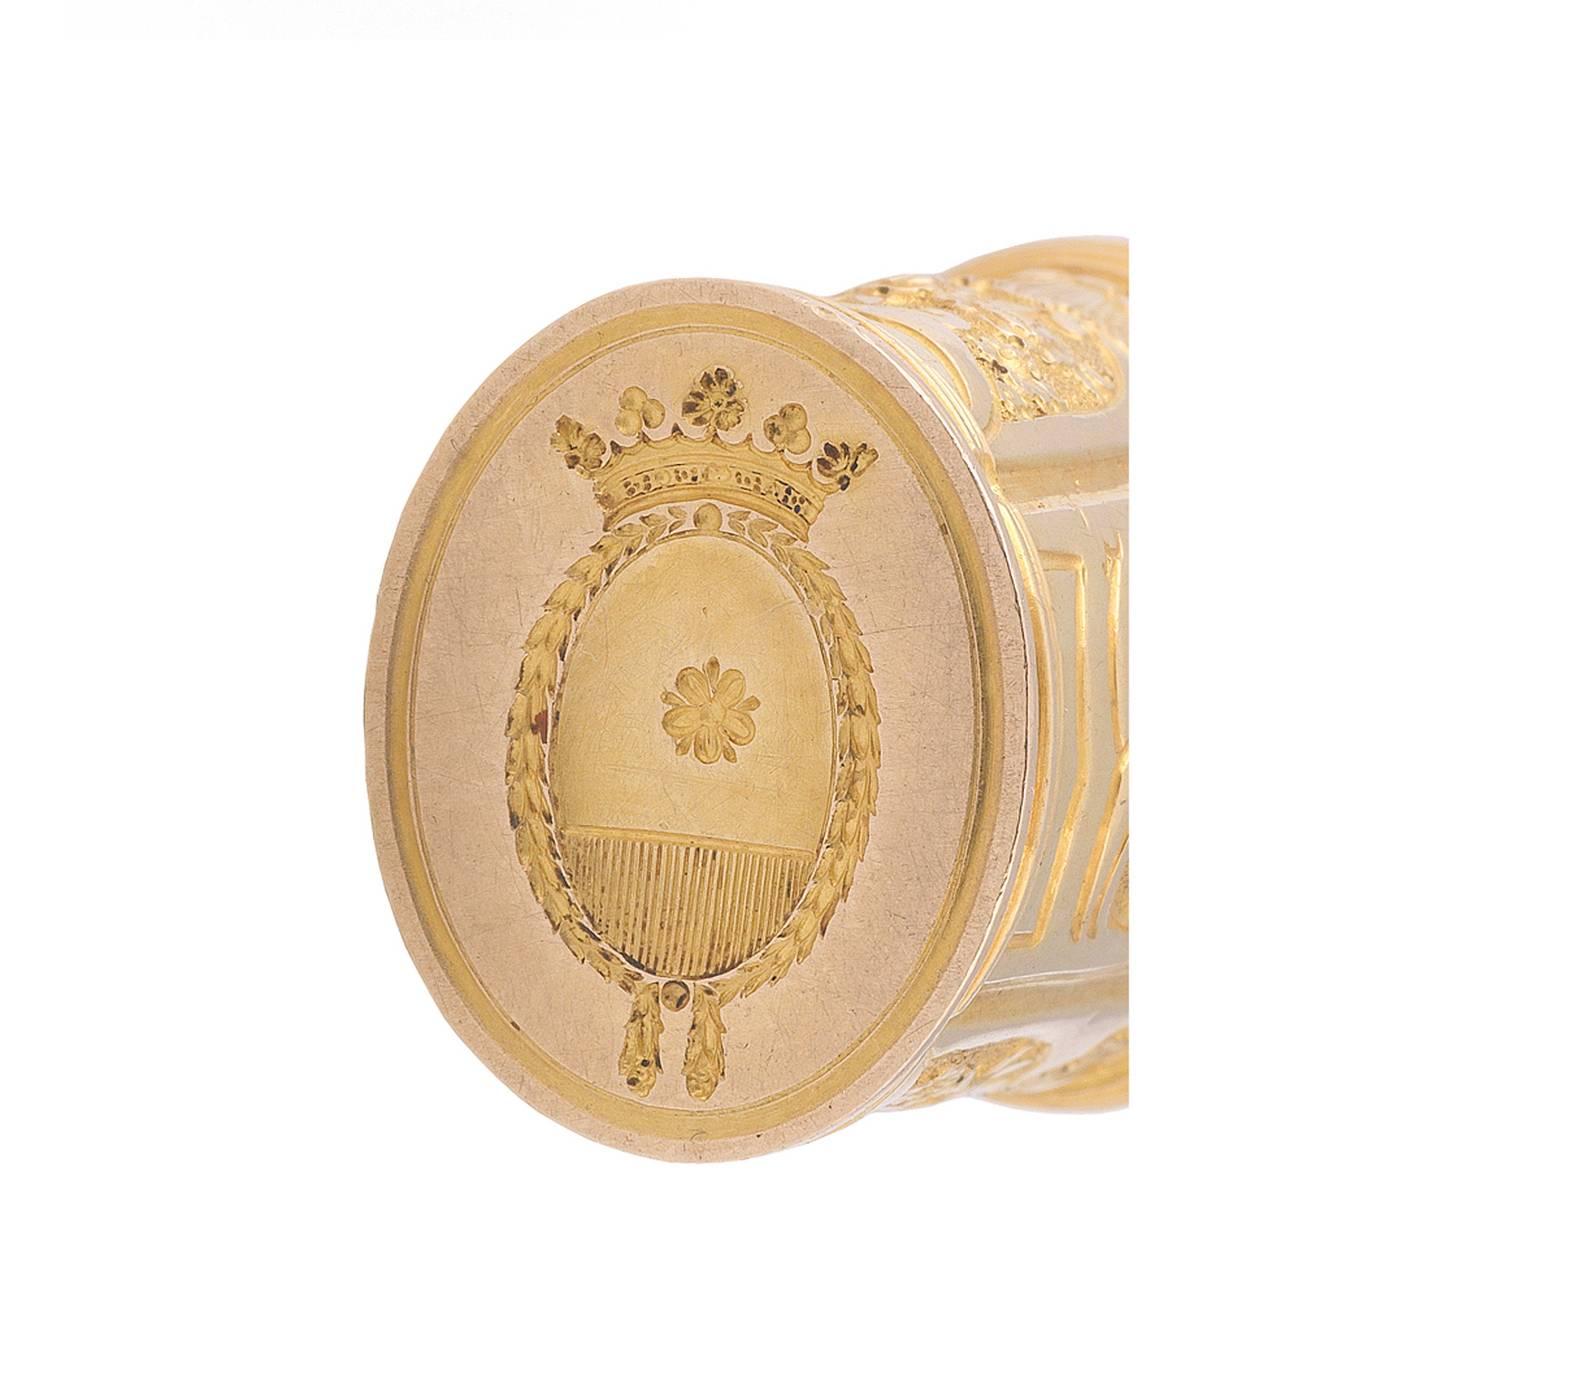 
PLEASE NOTE: OUR PRICE IS FULLY INCLUSIVE OF SHIPPING, IMPORTATION TAXES & DUTIES.

France, 1780 circa

Slightly tapering 18Kt yellow gold étui of oval section, the sides chased with shells and floral decorated panels on polished ground, the